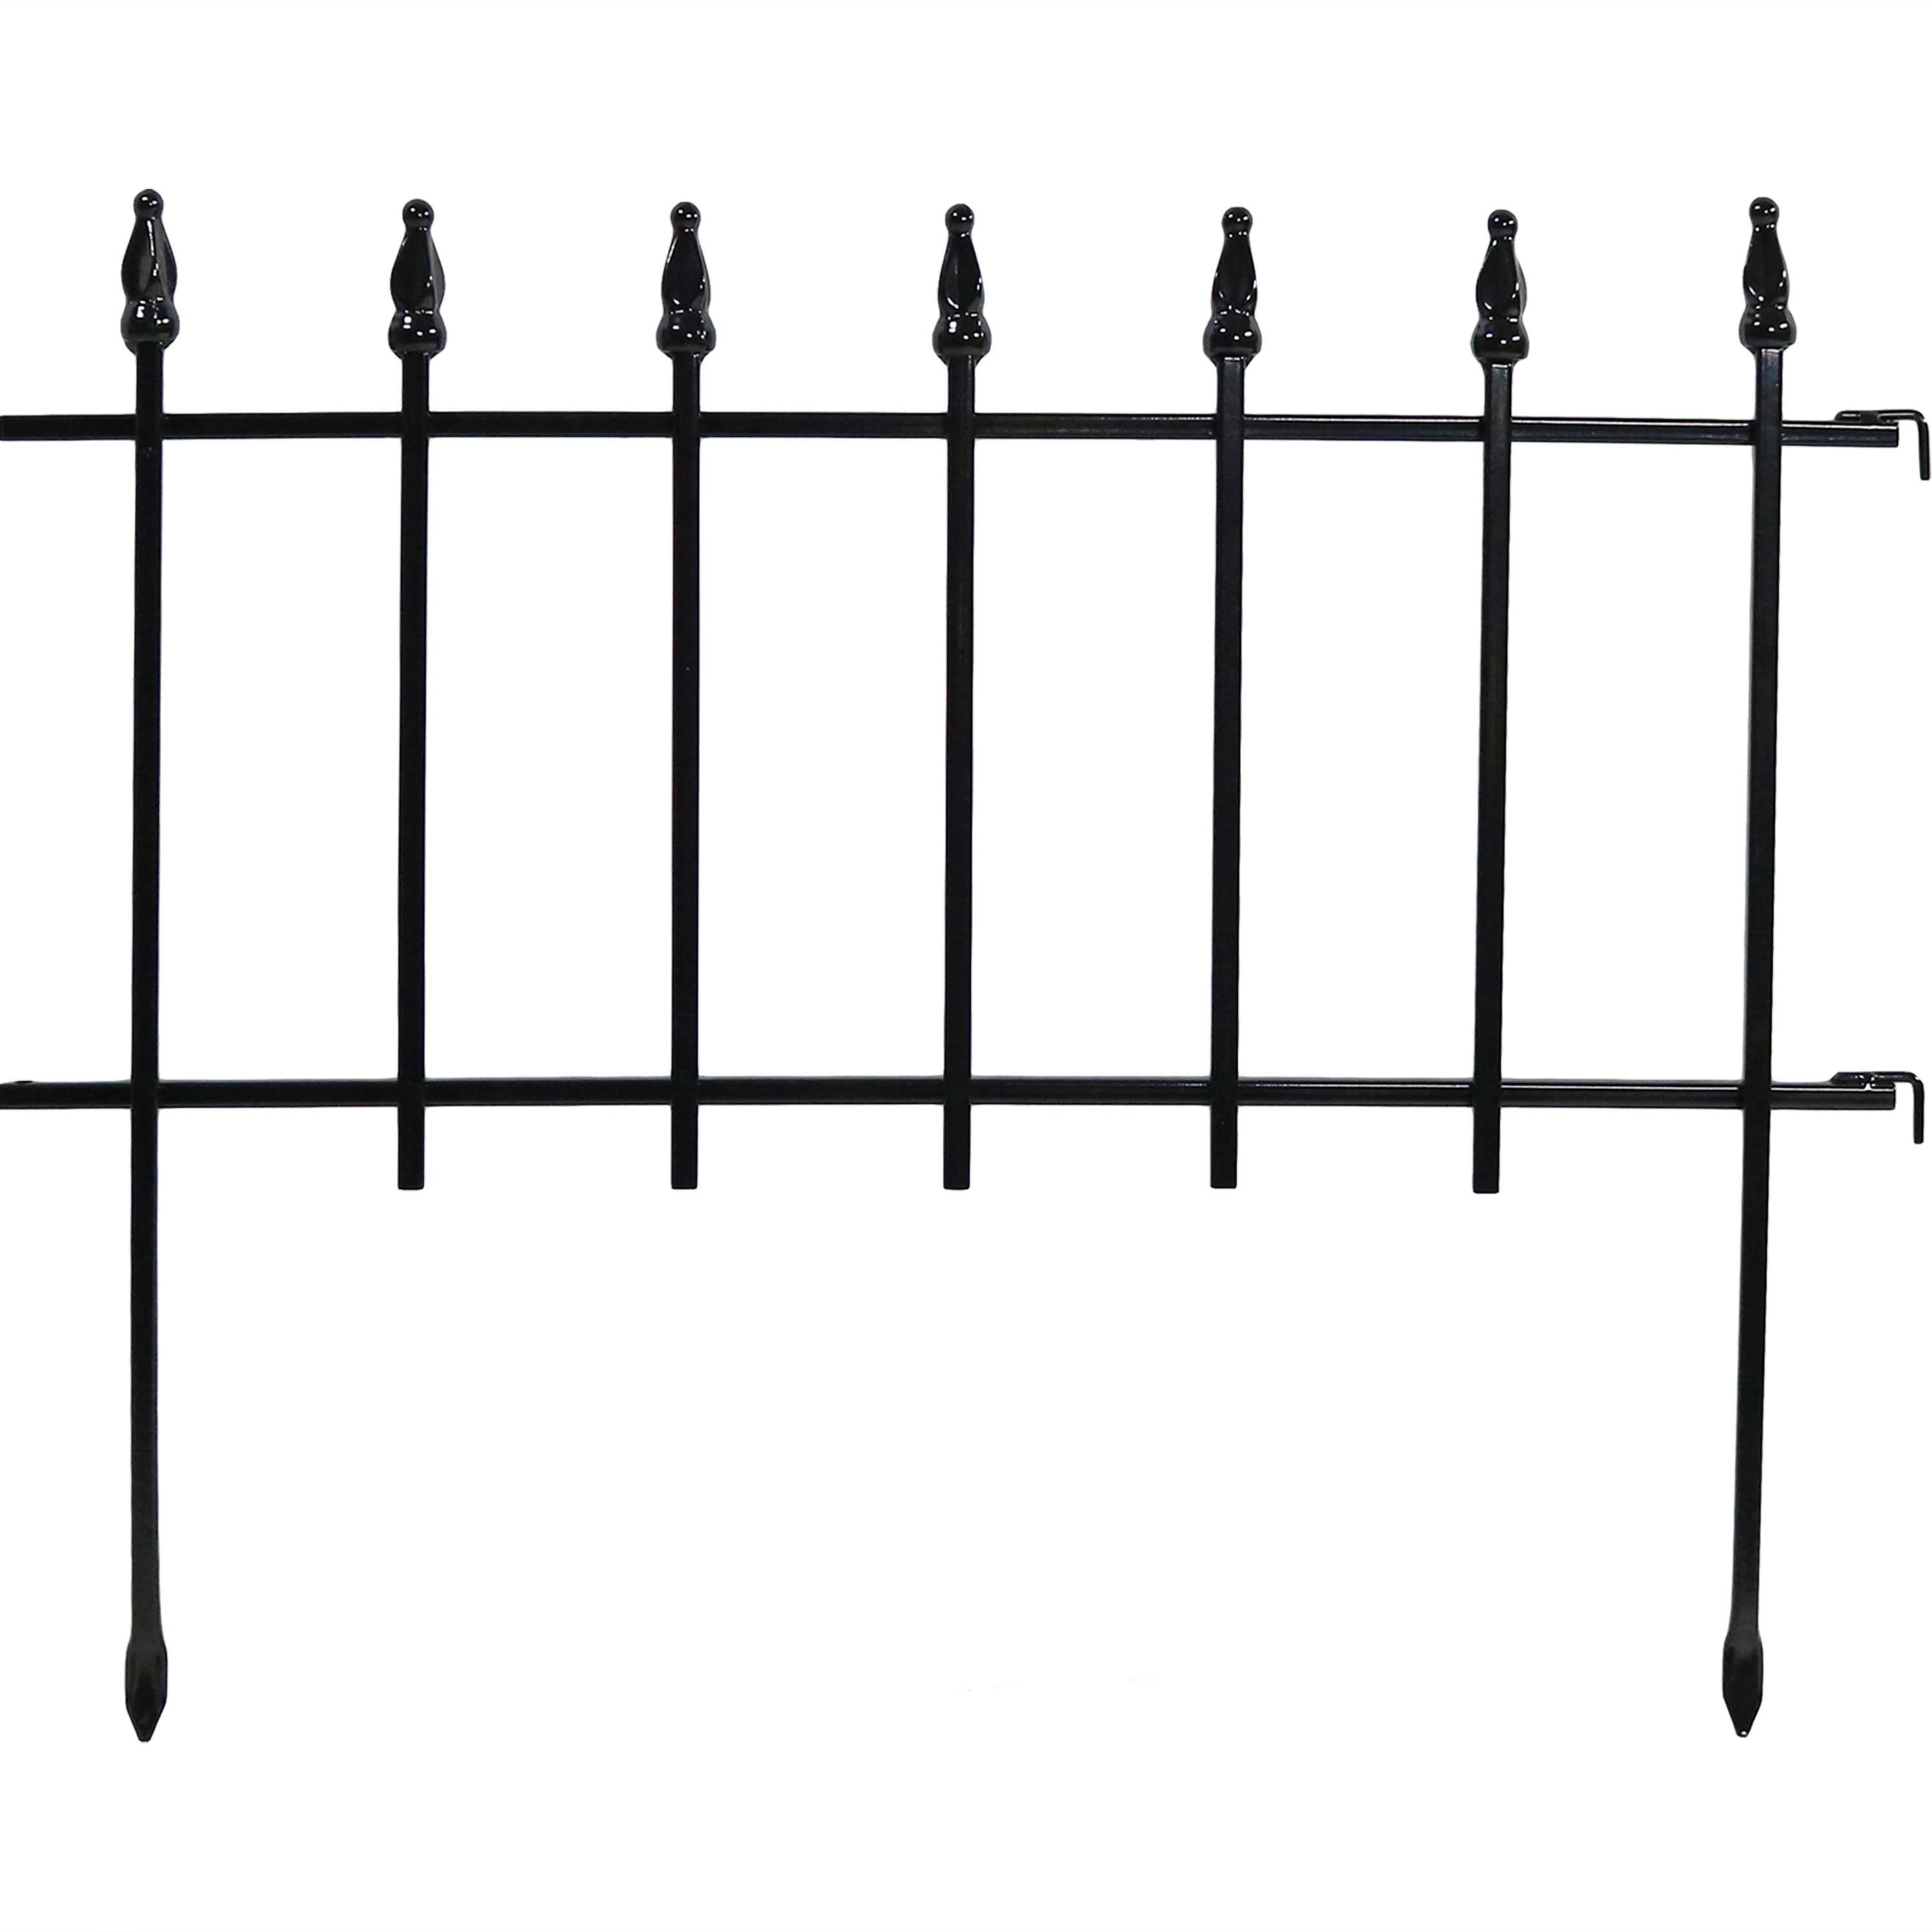 5pcs Overall Length 65 Inch,18 Inch x 13 Decorative Metal Garden Fencing 